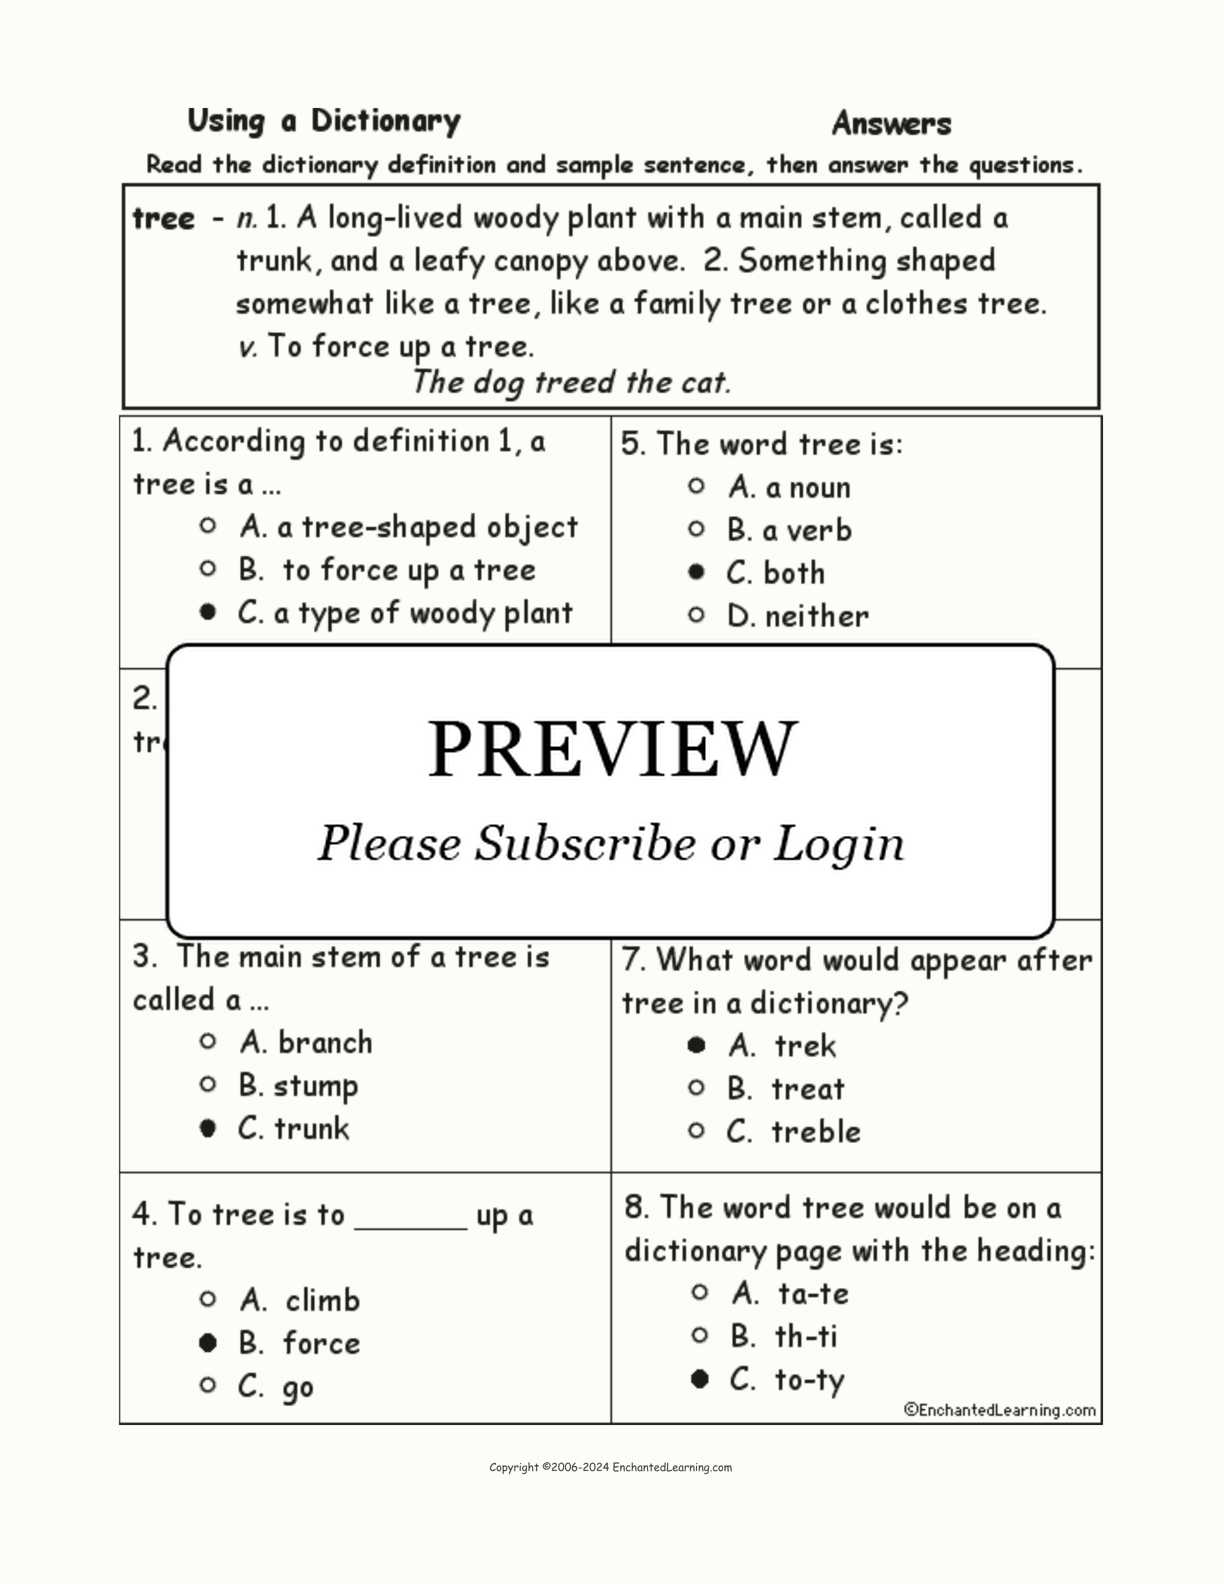 Tree Definition Quiz - Multiple Choice interactive worksheet page 2